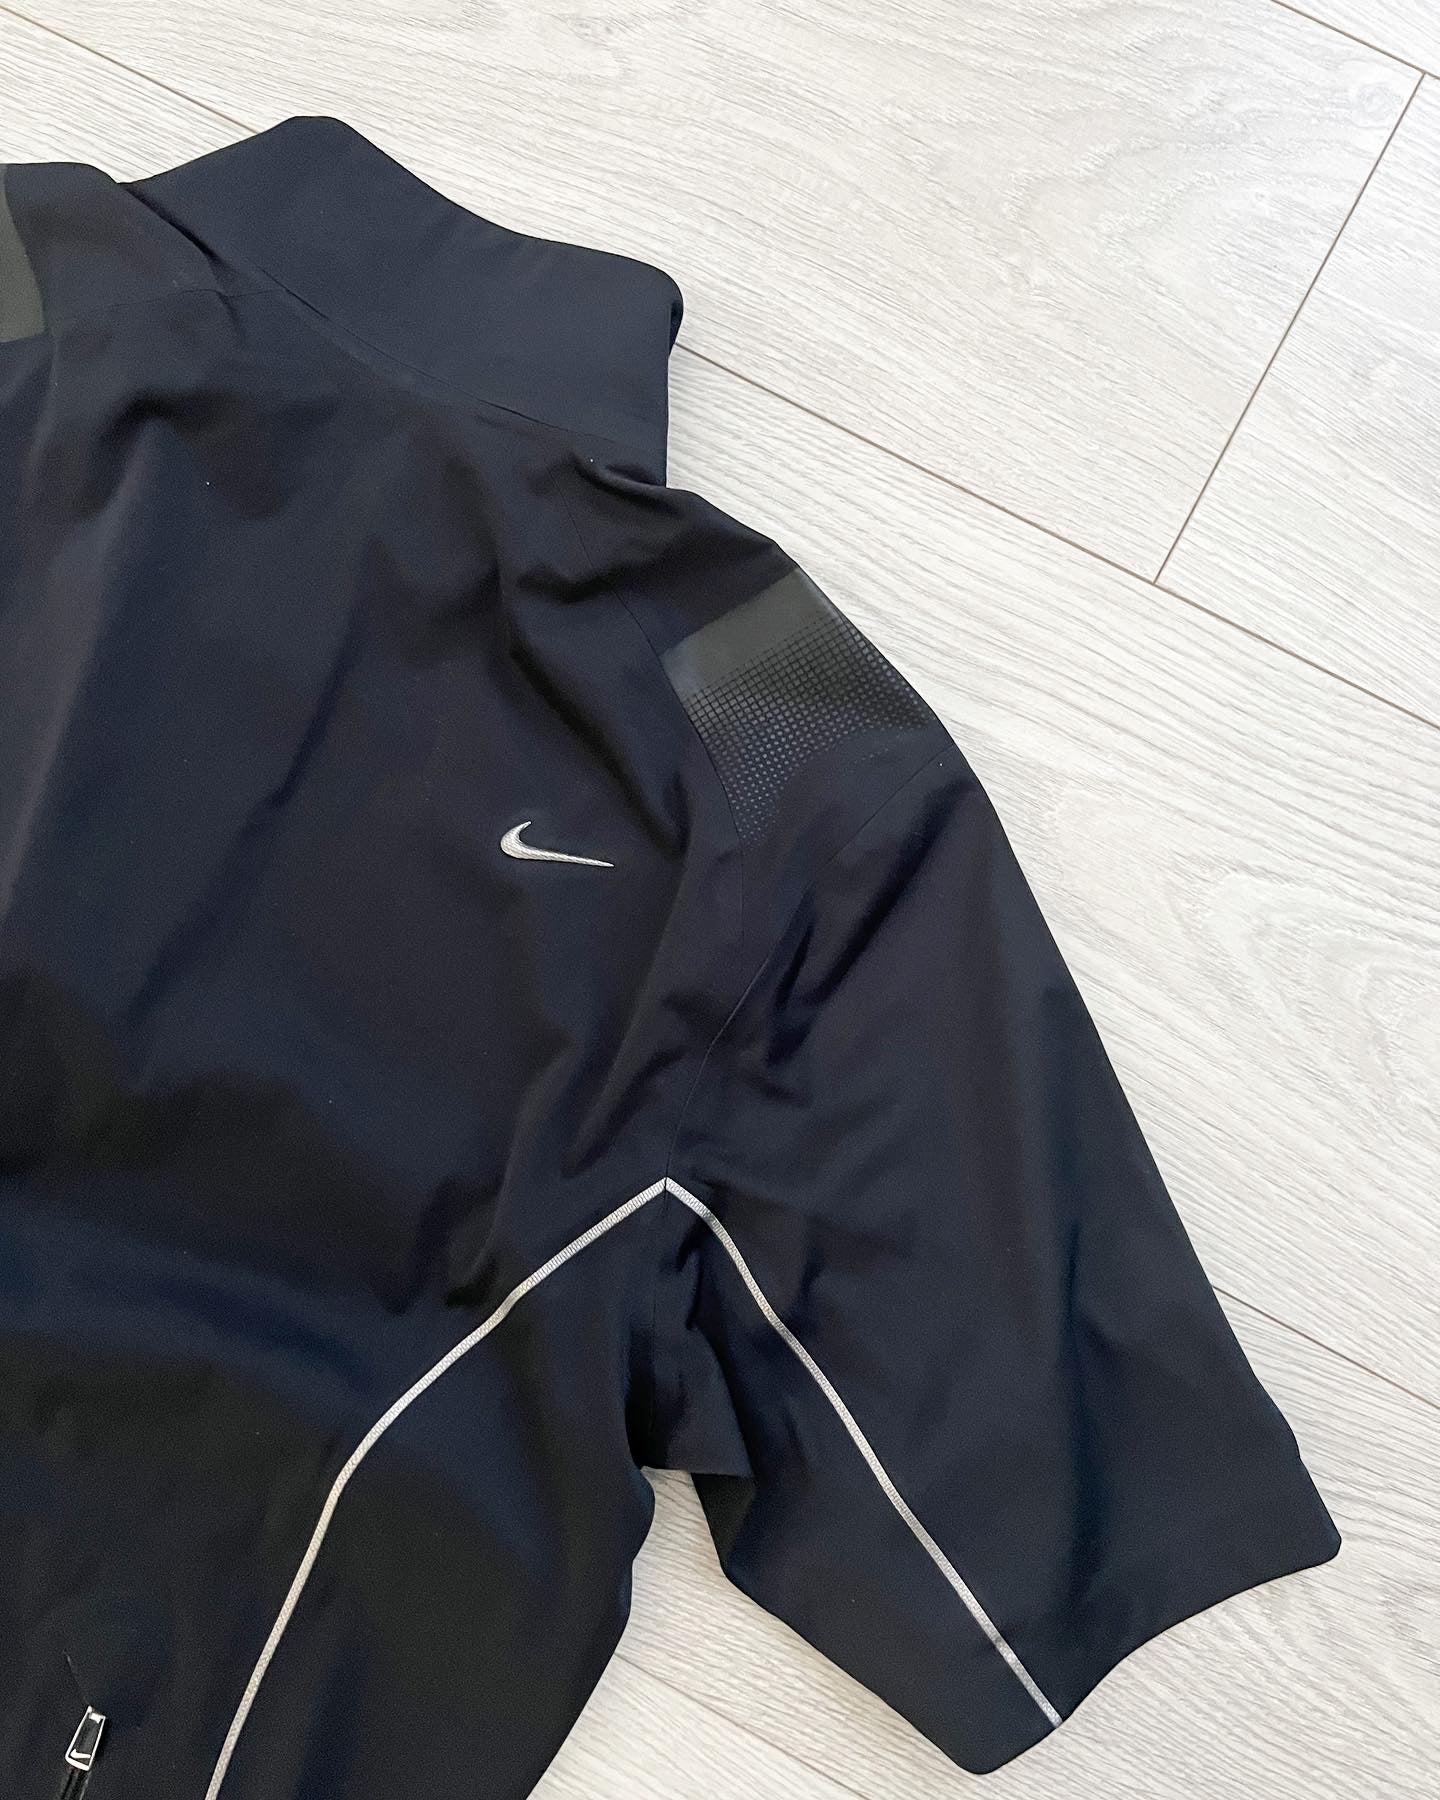 Nike FW2009 Storm Technical Taped Seam 1/4 Zip Pullover - Size M